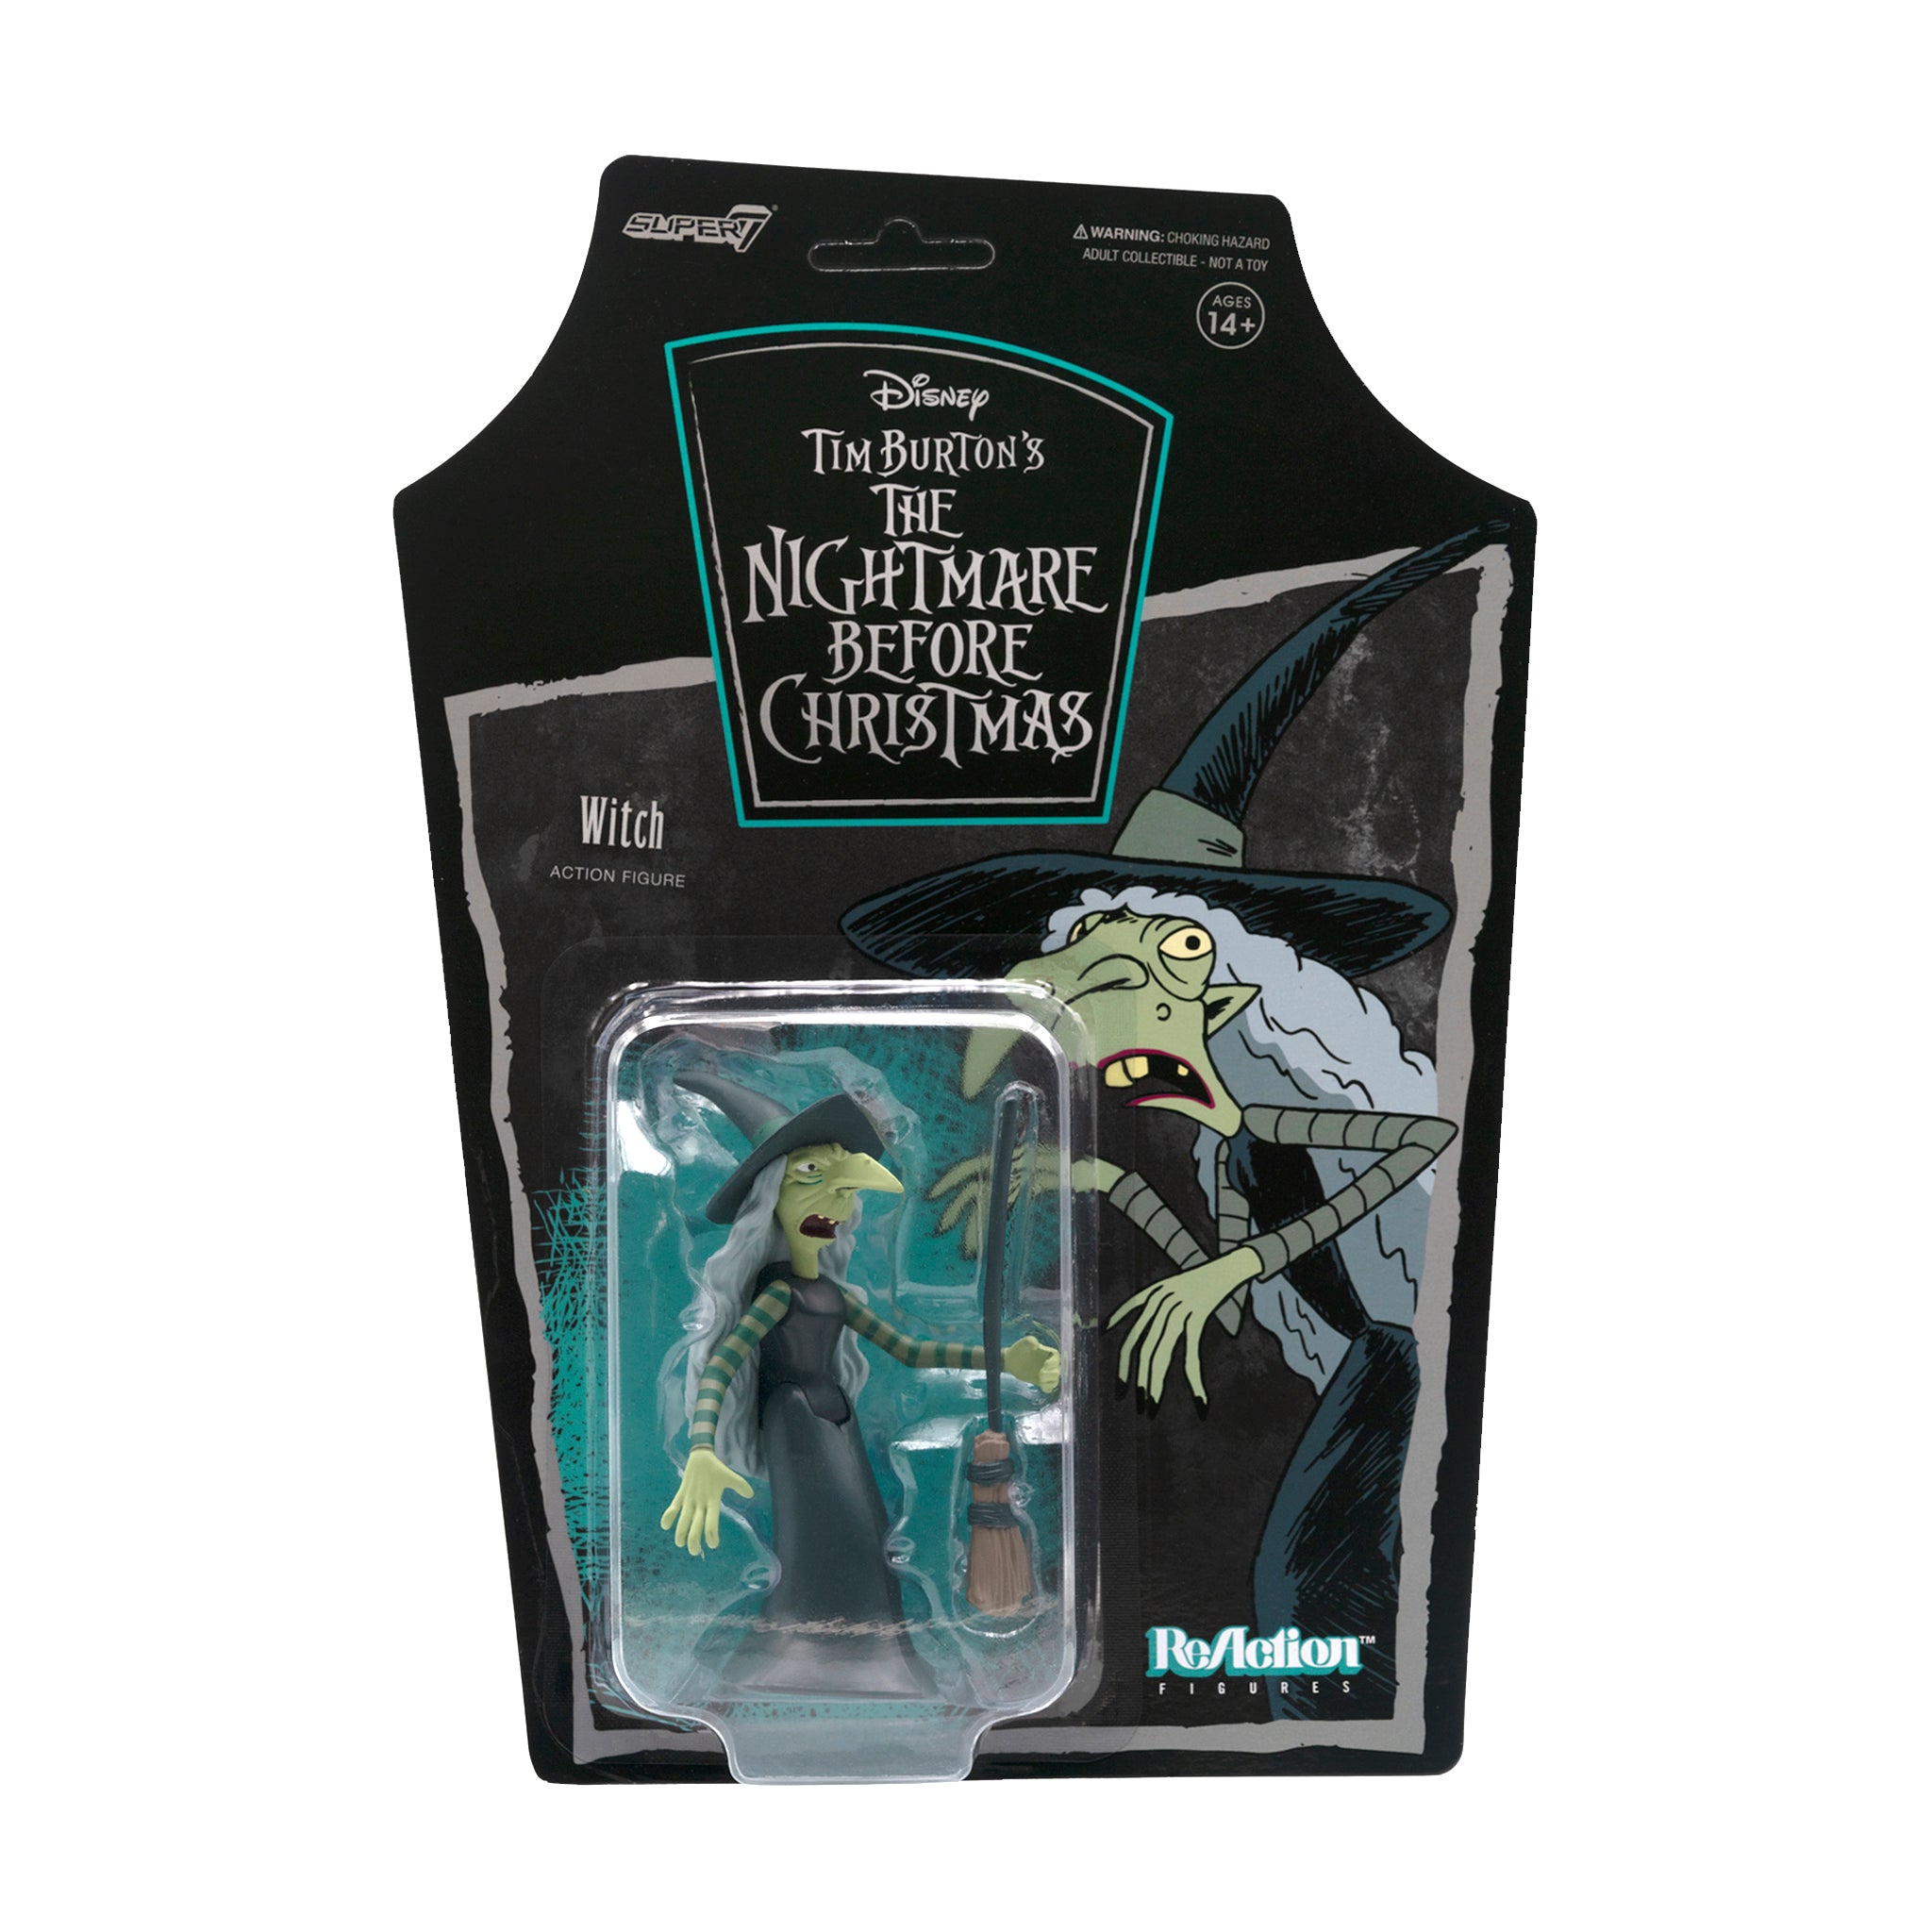 Tim Burton's The Nightmare Before Christmas ReAction Figures Wave 1  - Witch